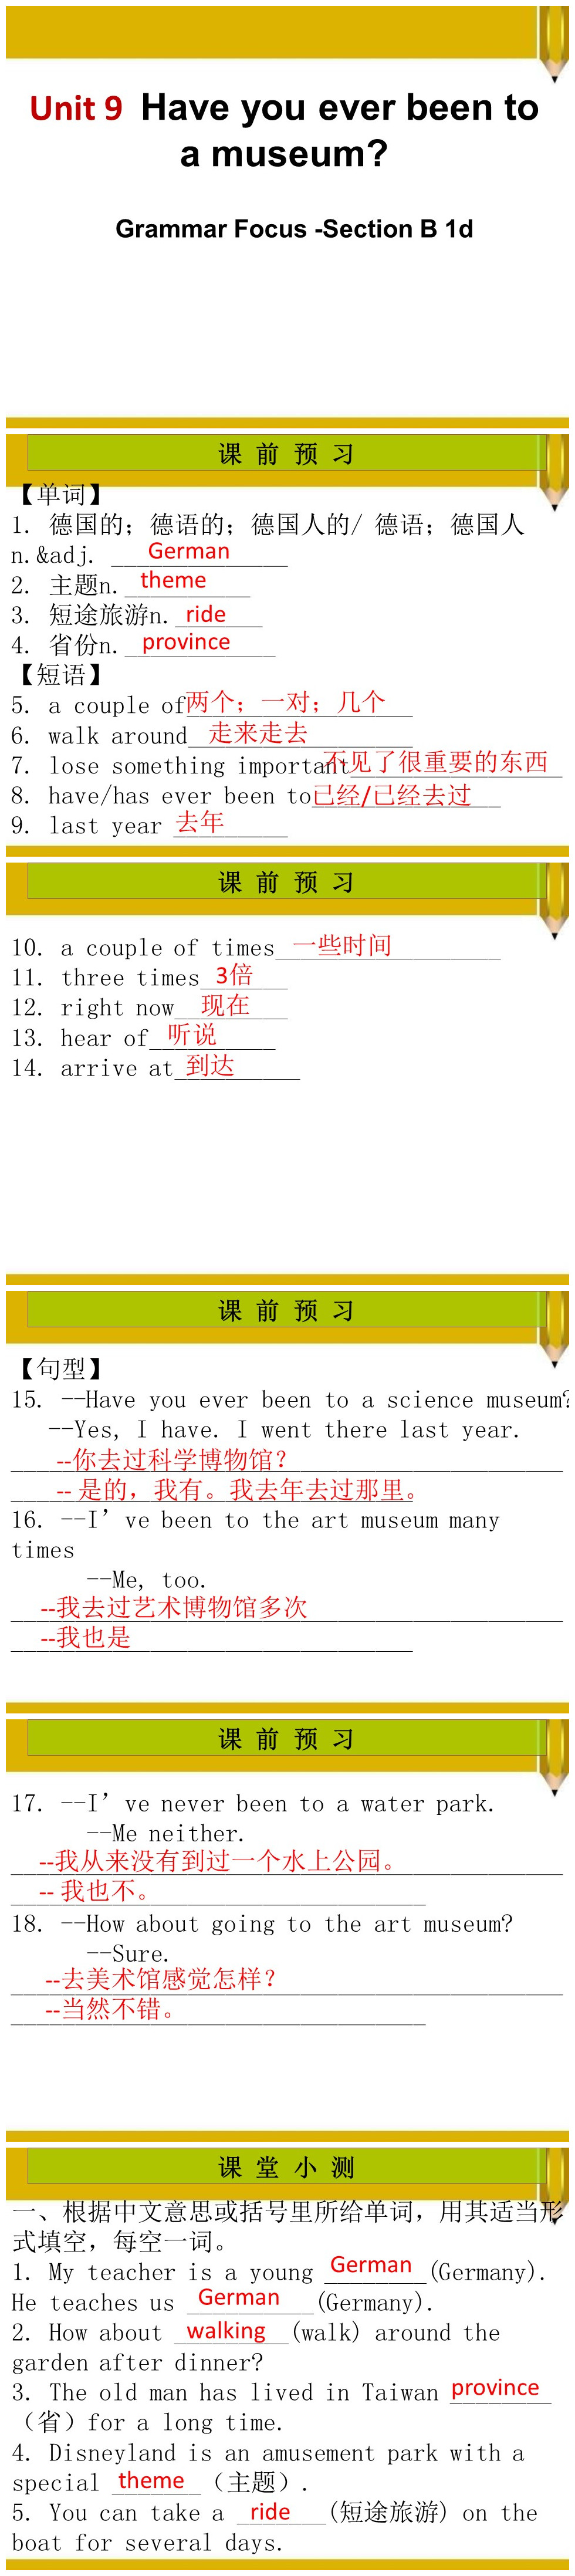 《Have you ever been to a museum?》PPT课件13PPT课件下载